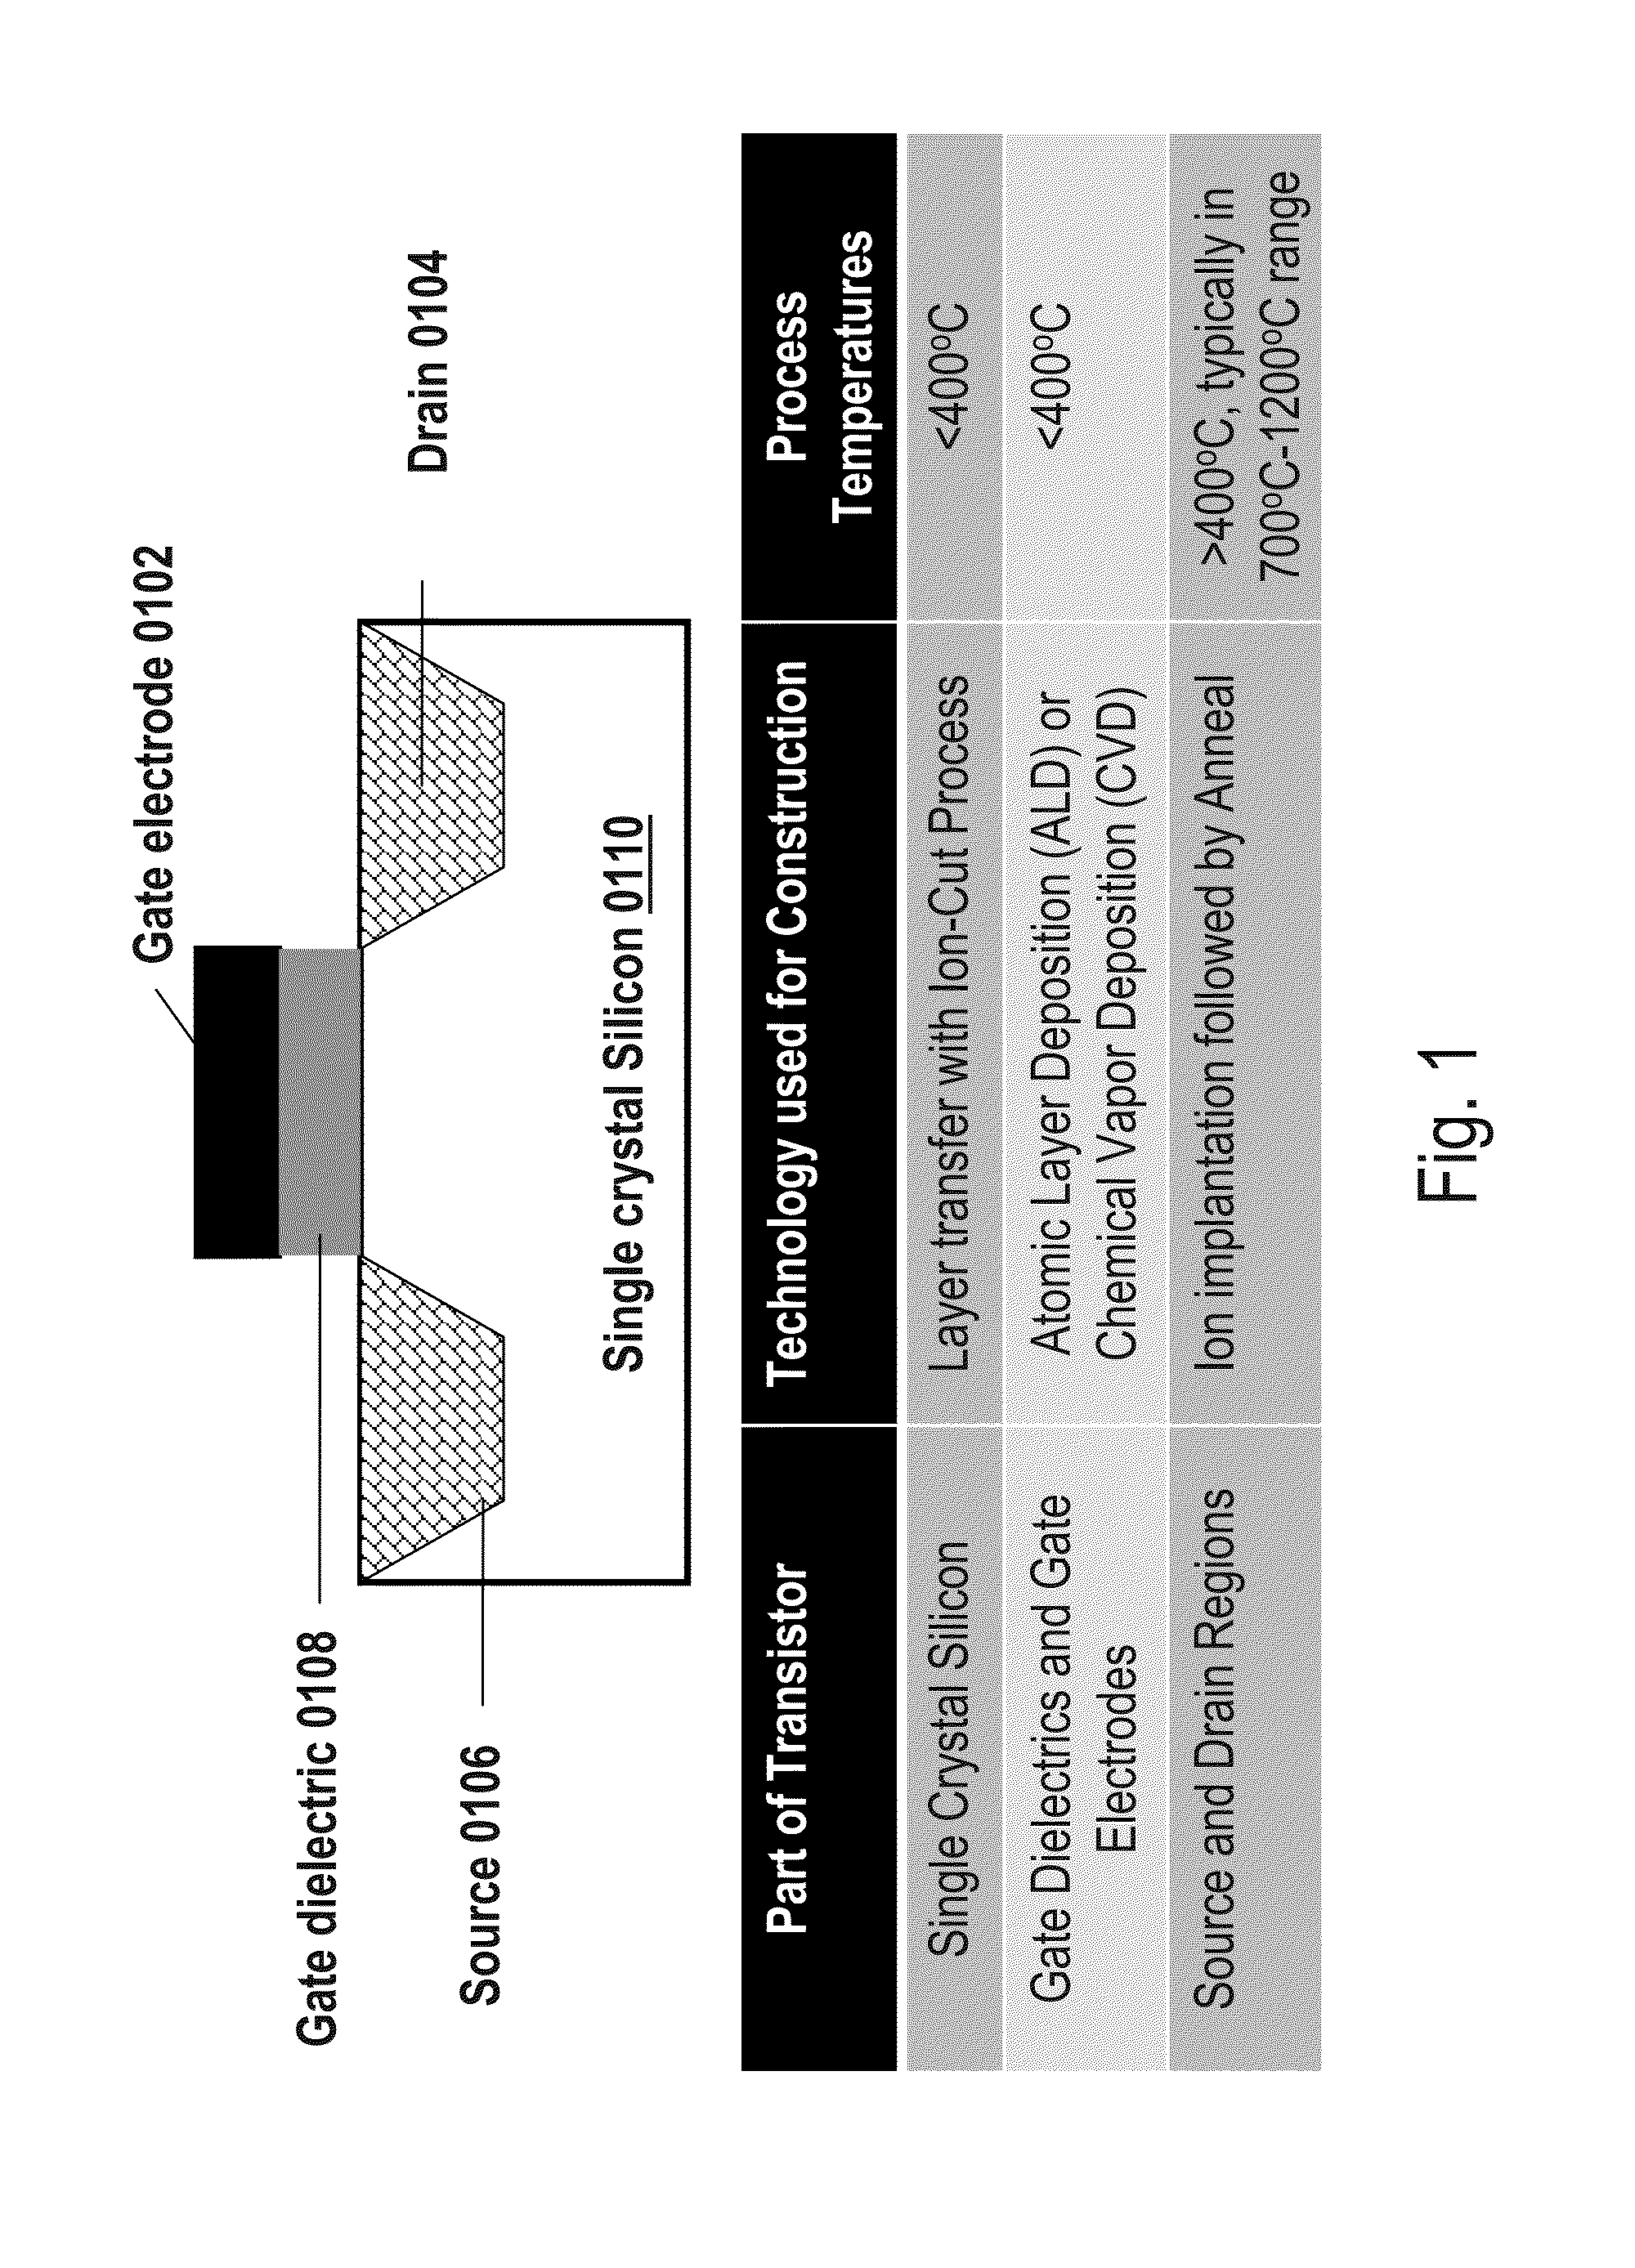 Method of forming three dimensional integrated circuit devices using layer transfer technique